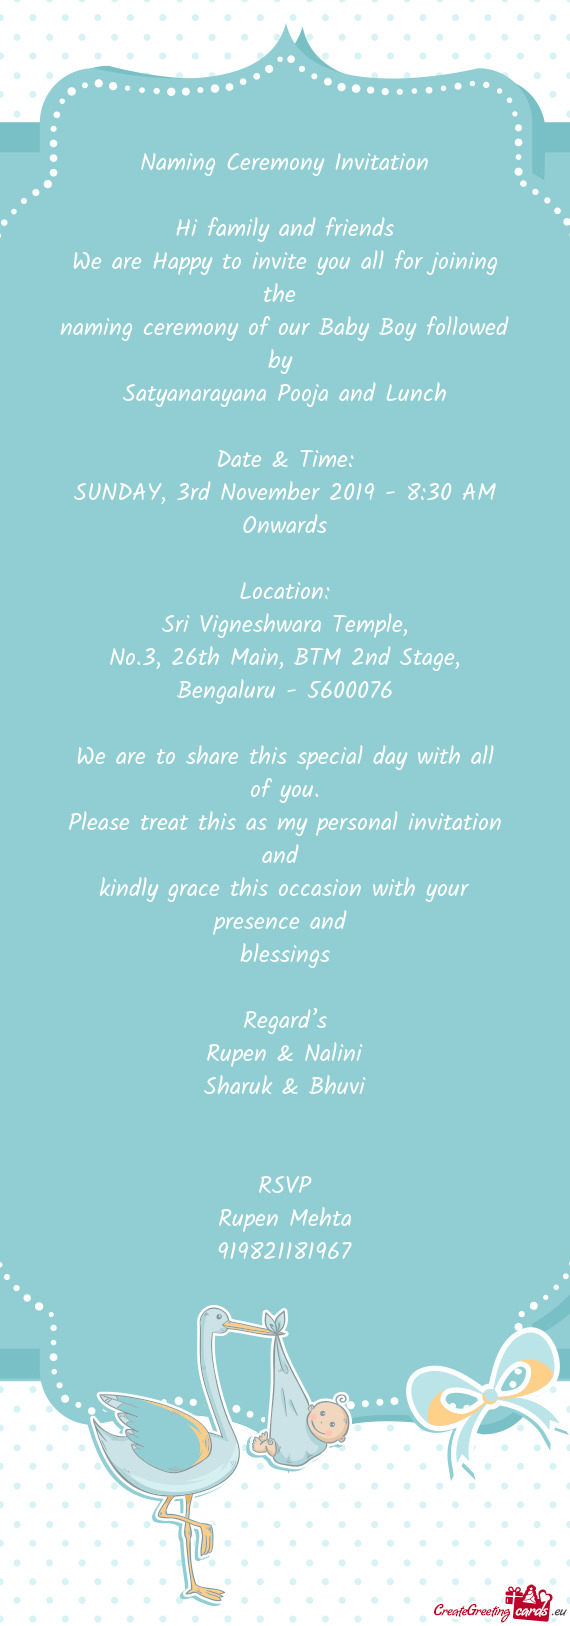 Naming ceremony of our Baby Boy followed by